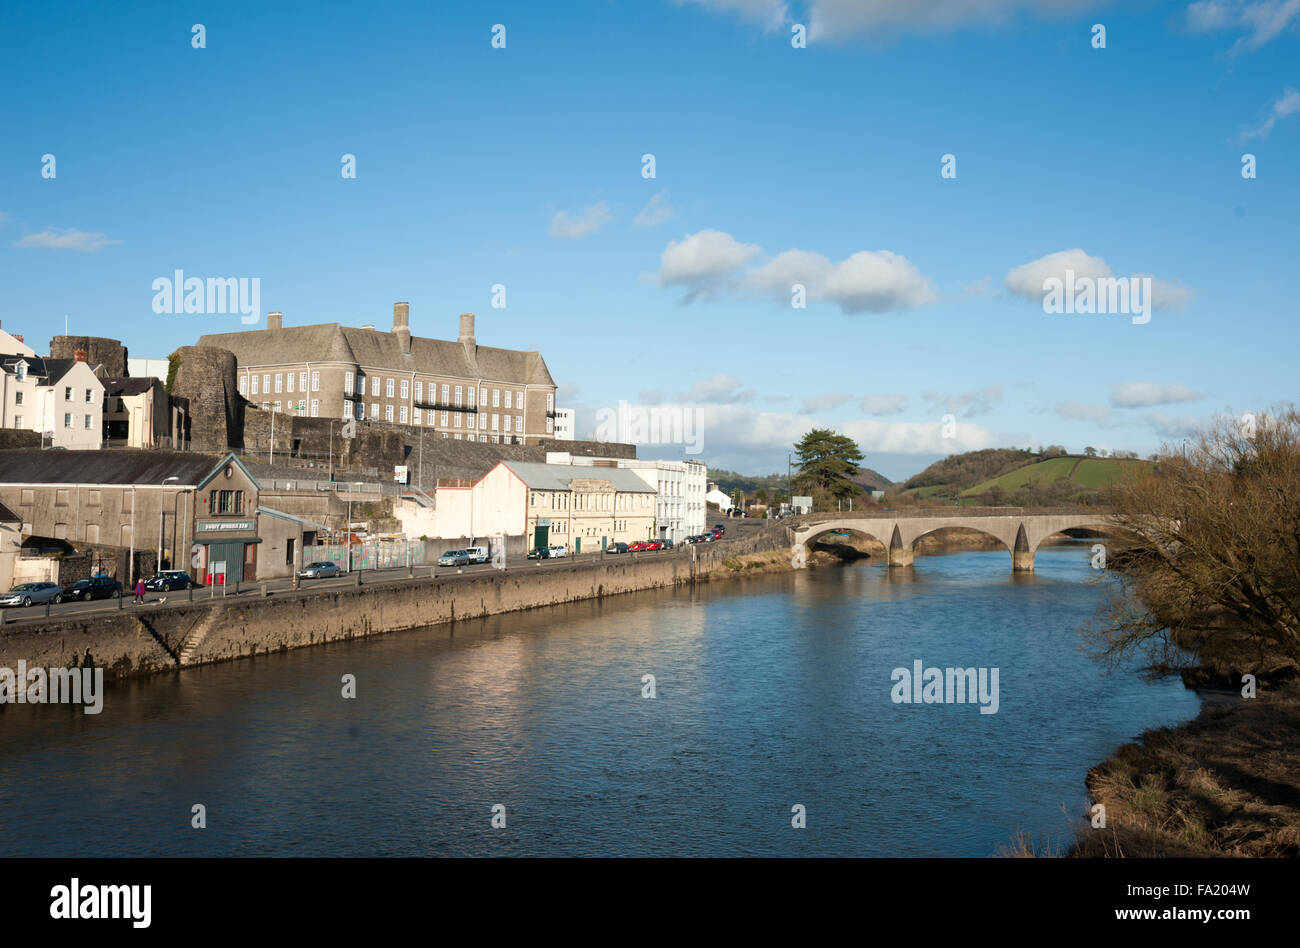 South Wales, UK, Sunday 20th December 2015. BEFORE and AFTER picture. The river Towy, Carmarthen quayside, Carmarthenshire, west Wales UK. View overlooking river Towy from pedestrian footbridge.NOTE: Image taken 08-03-2015 Credit:  Algis Motuza/Alamy Live News Stock Photo